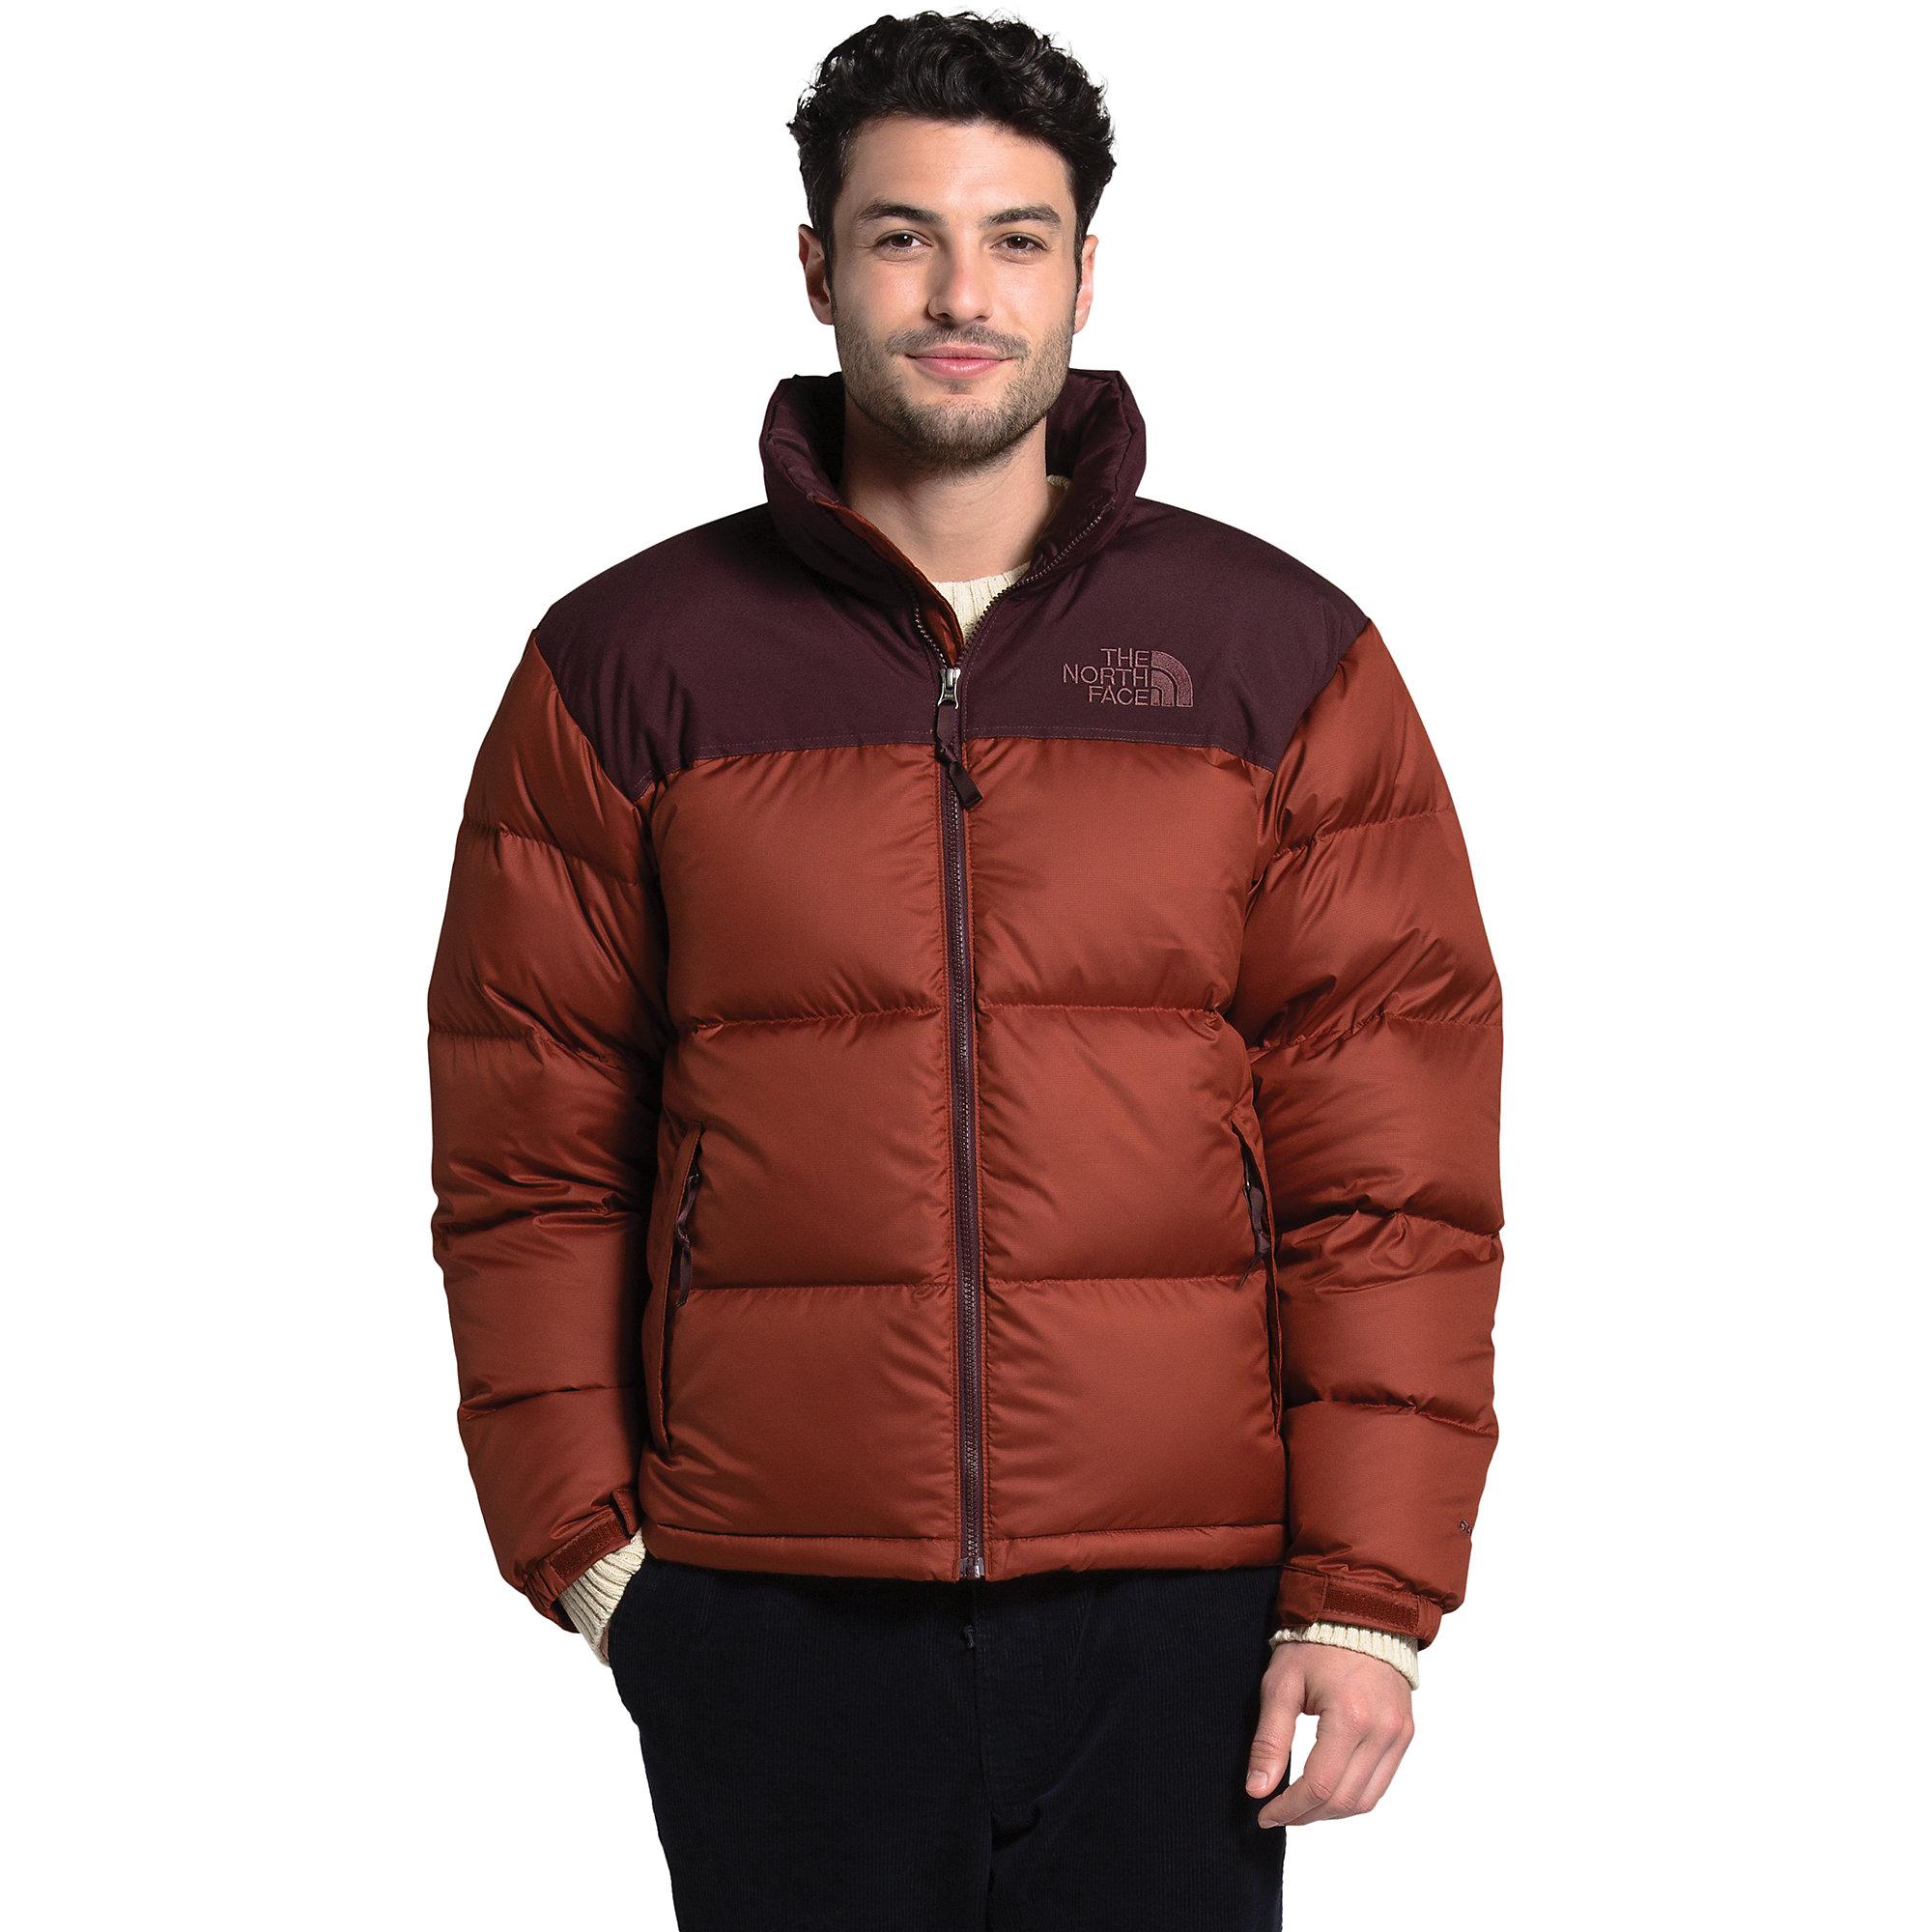 The North Face Synthetic Eco Nuptse Jacket in Brown for Men - Lyst